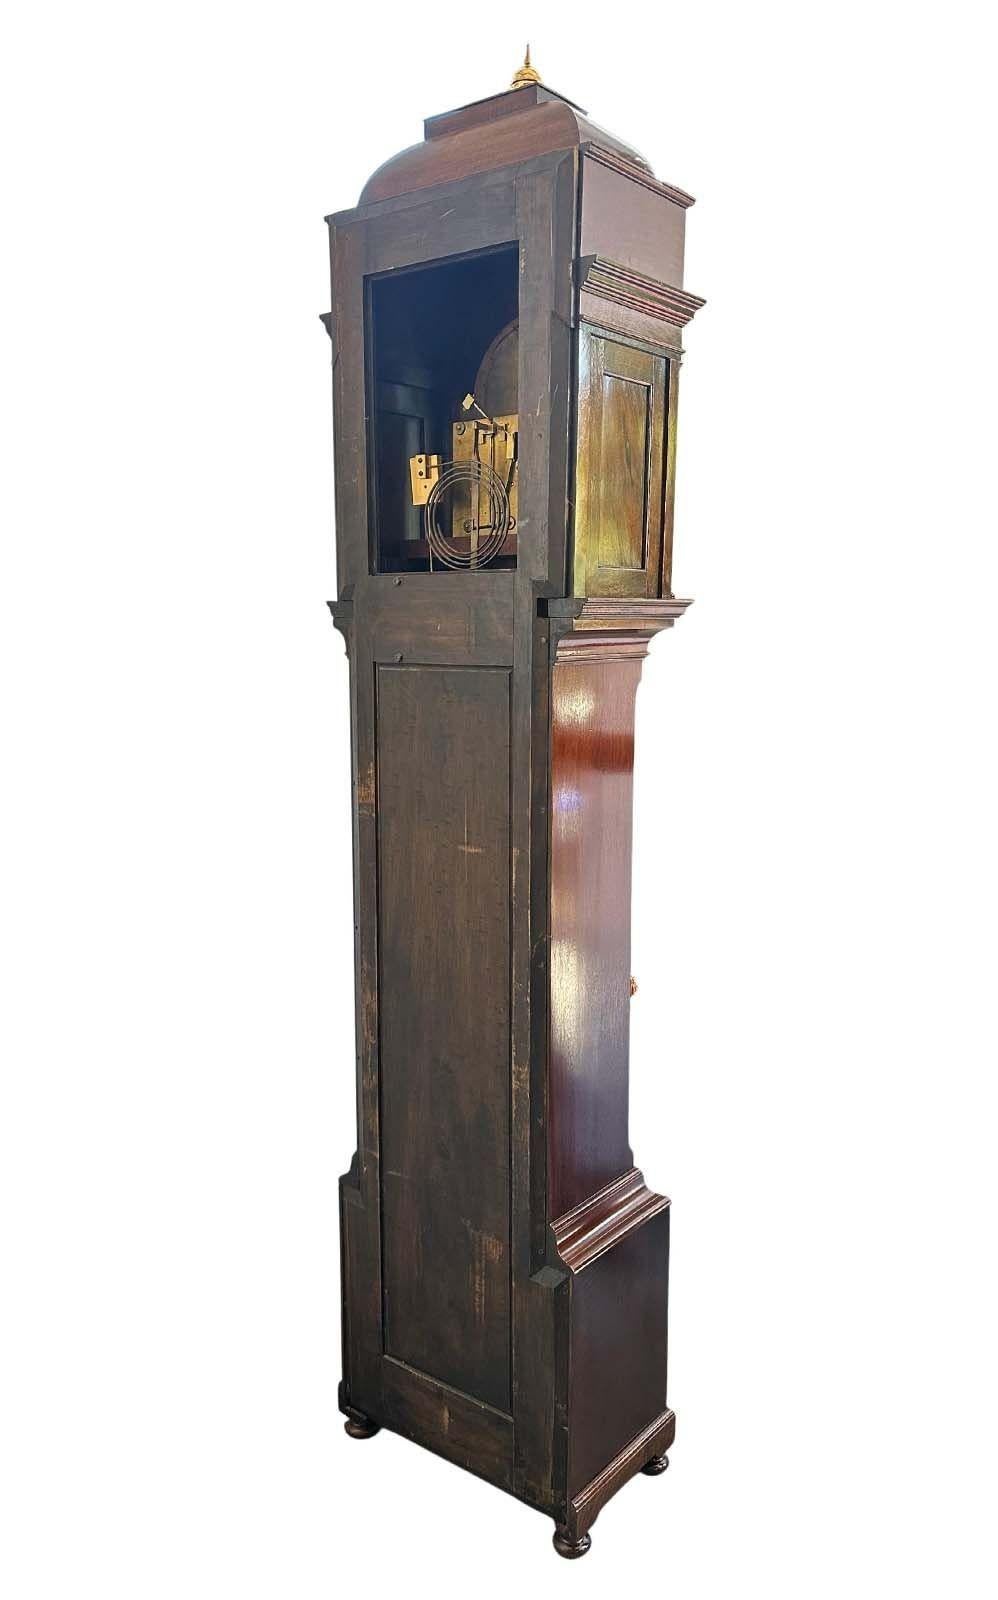 Impressive English mahogany clock by J.J. Elliot retailed by Tiffany & Co. showcasing delicate floral marquetry. The sculptural bonnet adorned with brass spire finials embellish the artistry of this beautiful antique mirror.
Includes brass and